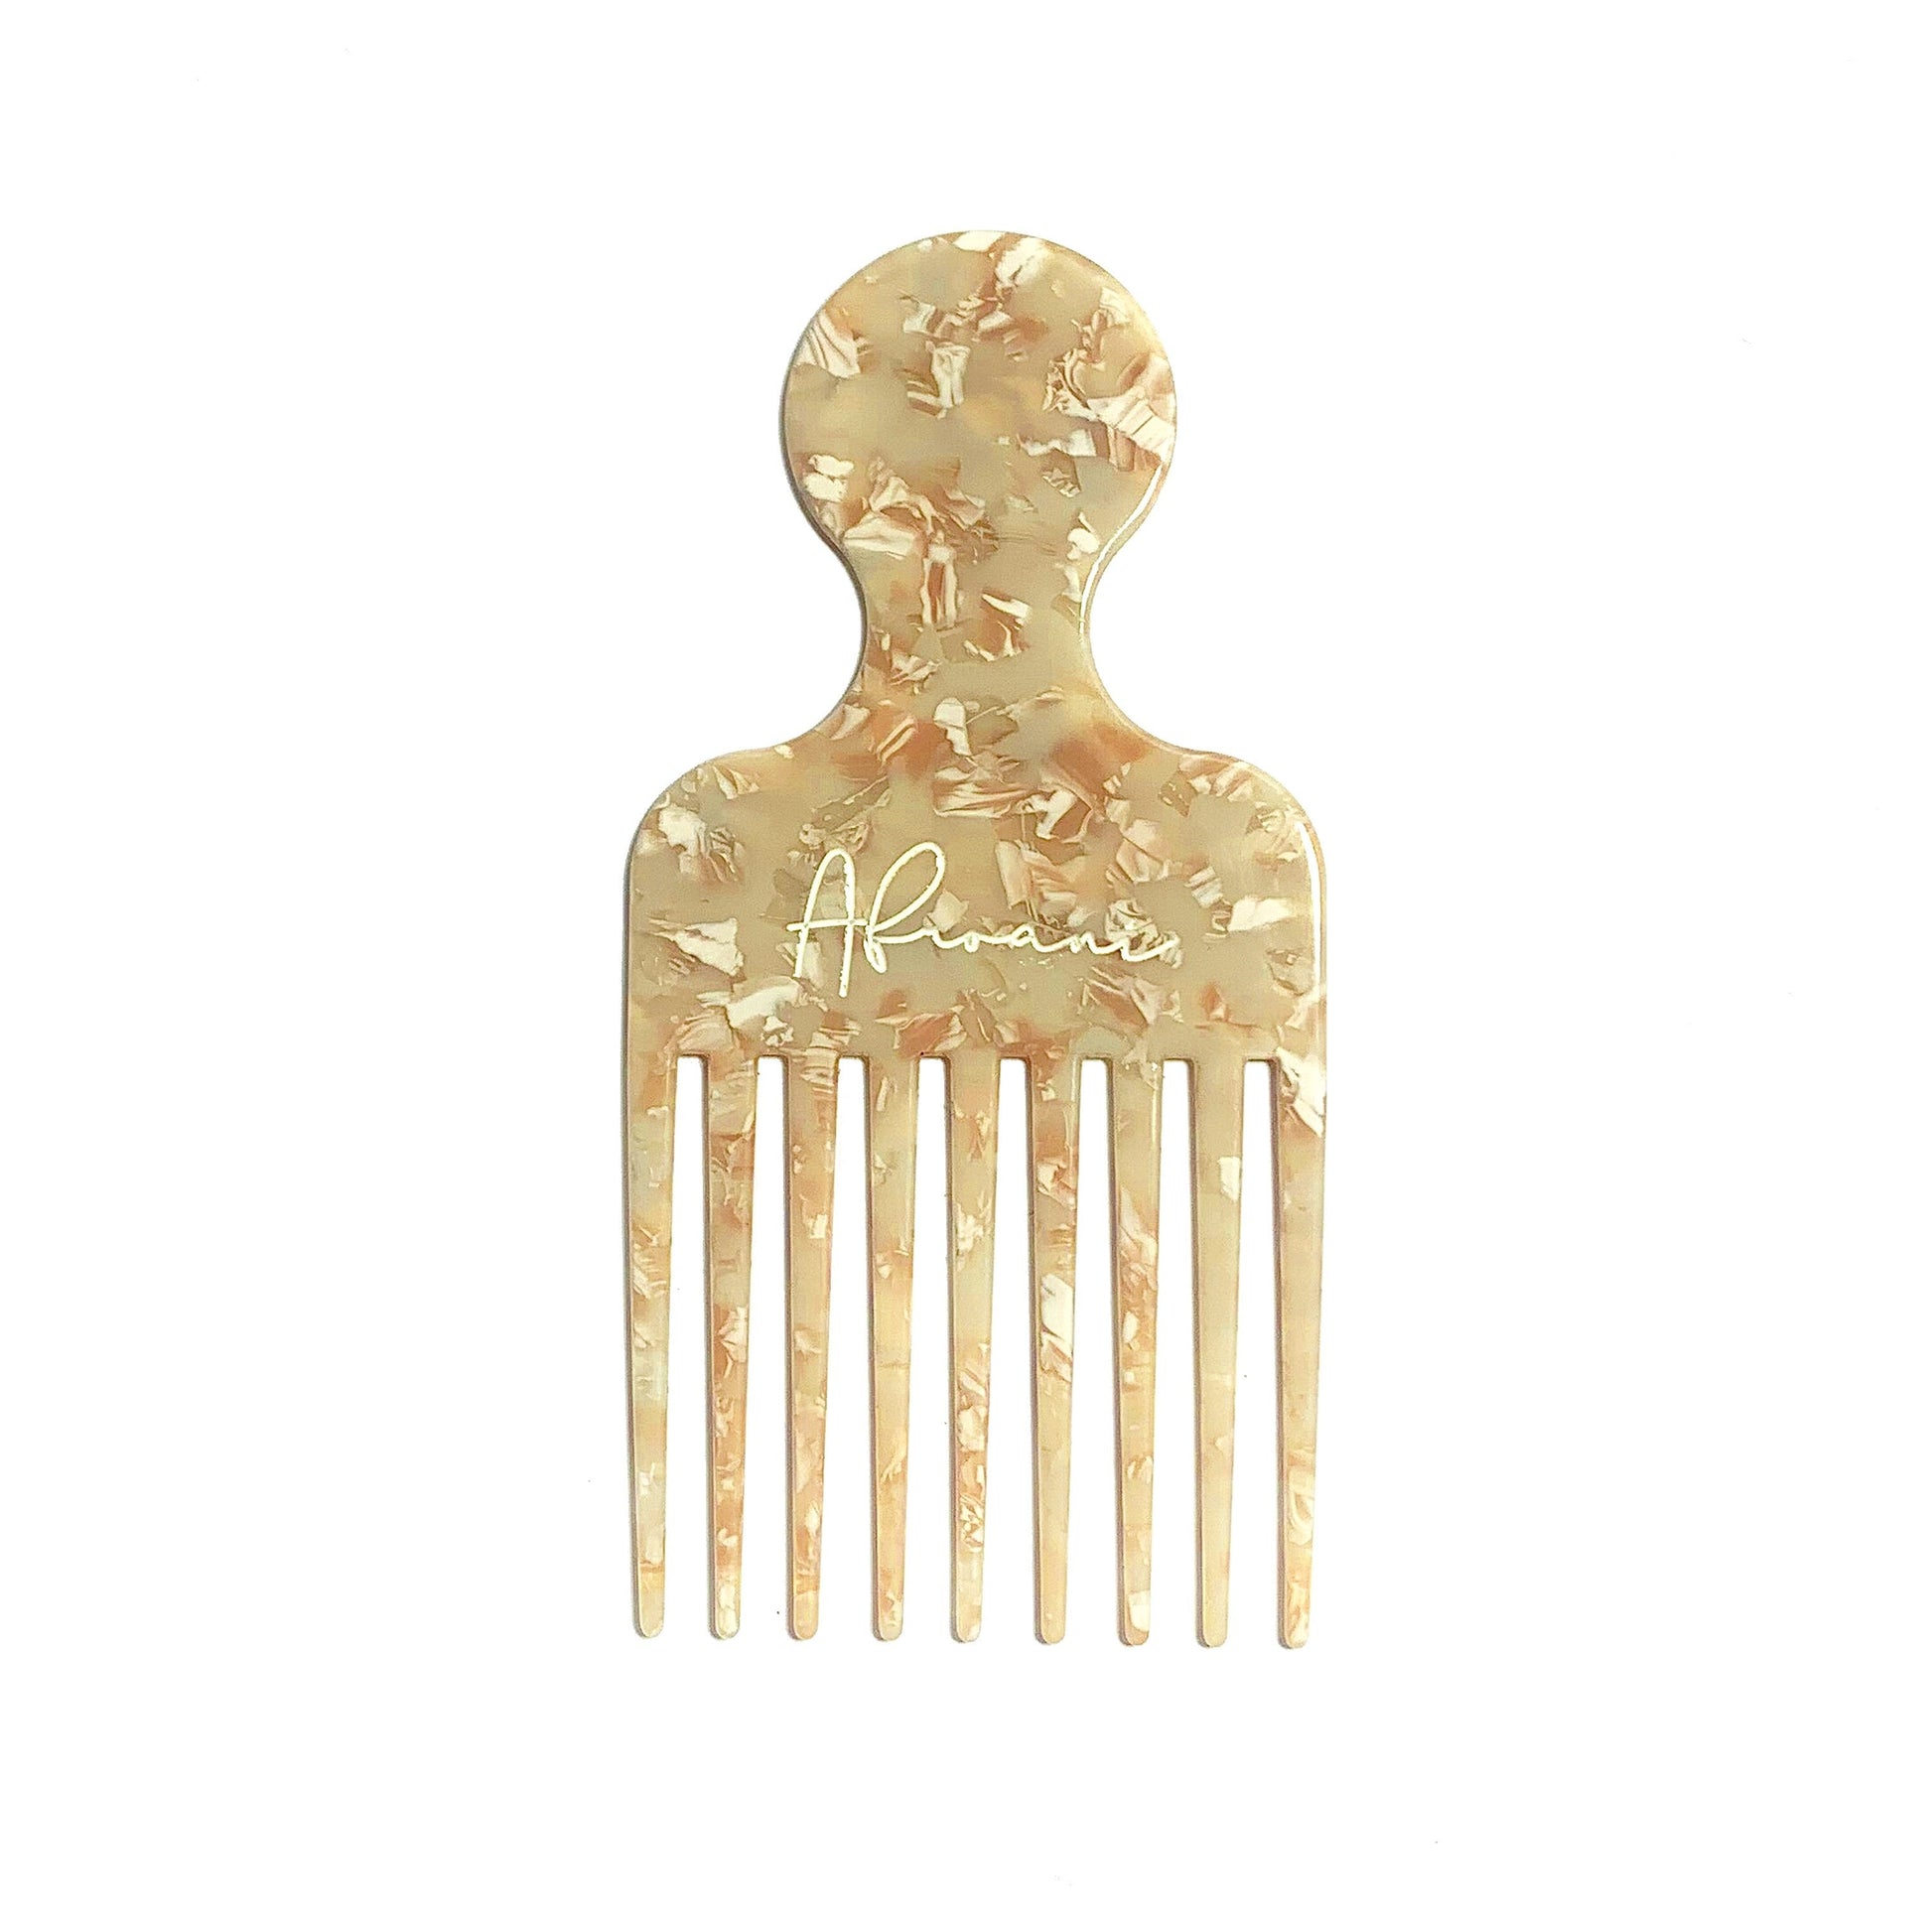 afroani cream plastic free afro comb hair pick, white background